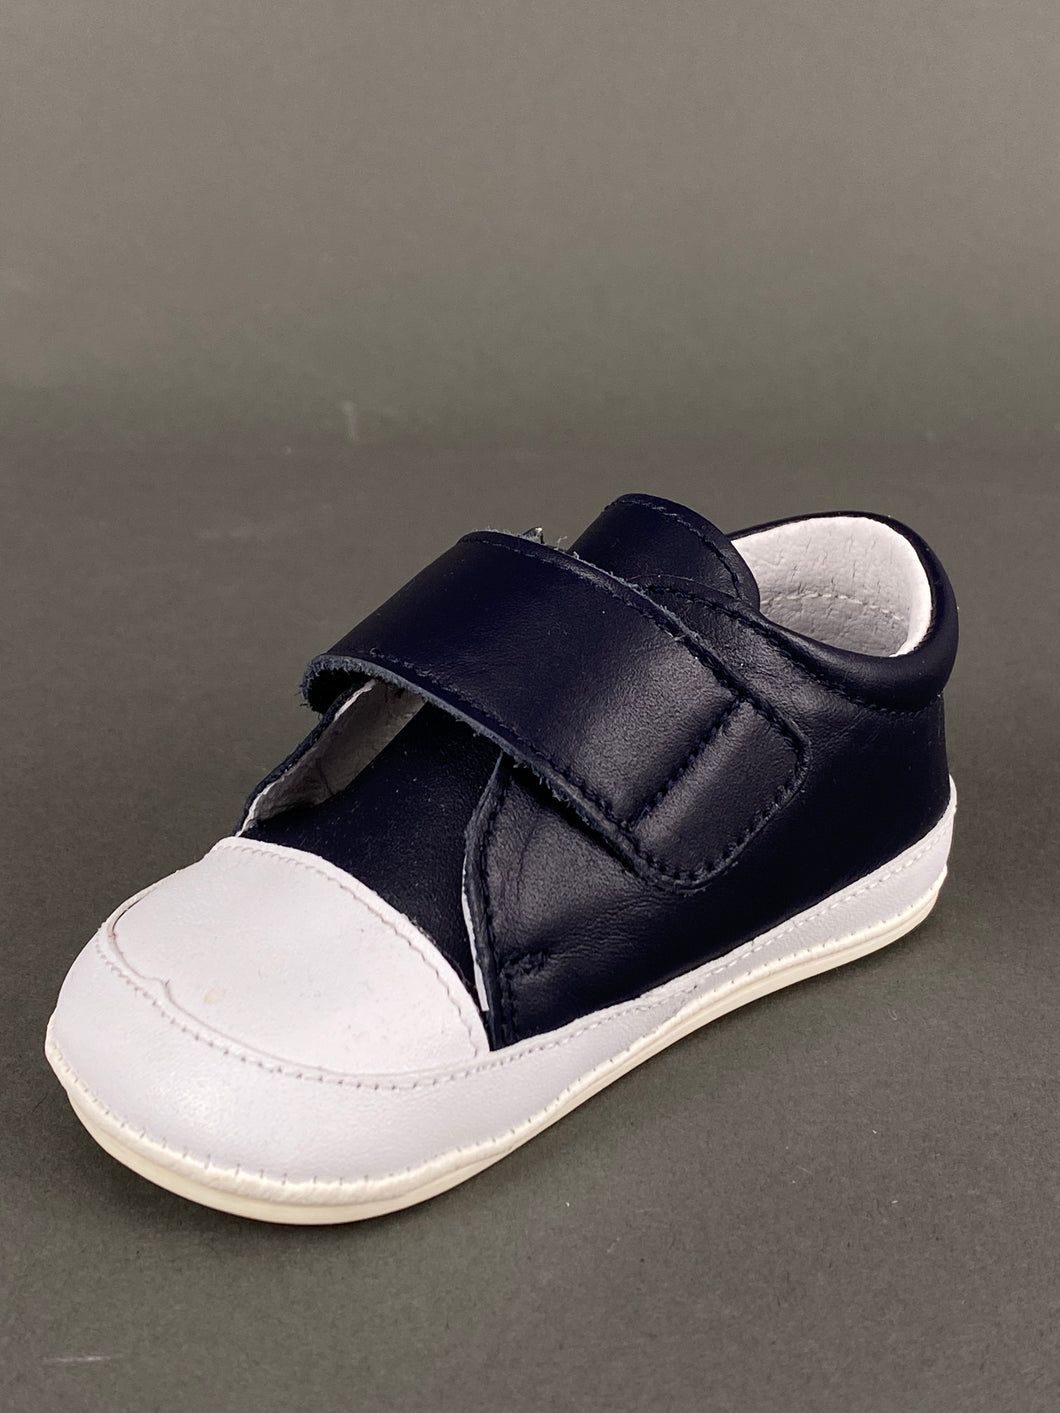 White and Navy Blue Leather Walking Shoe with Velcro Strap